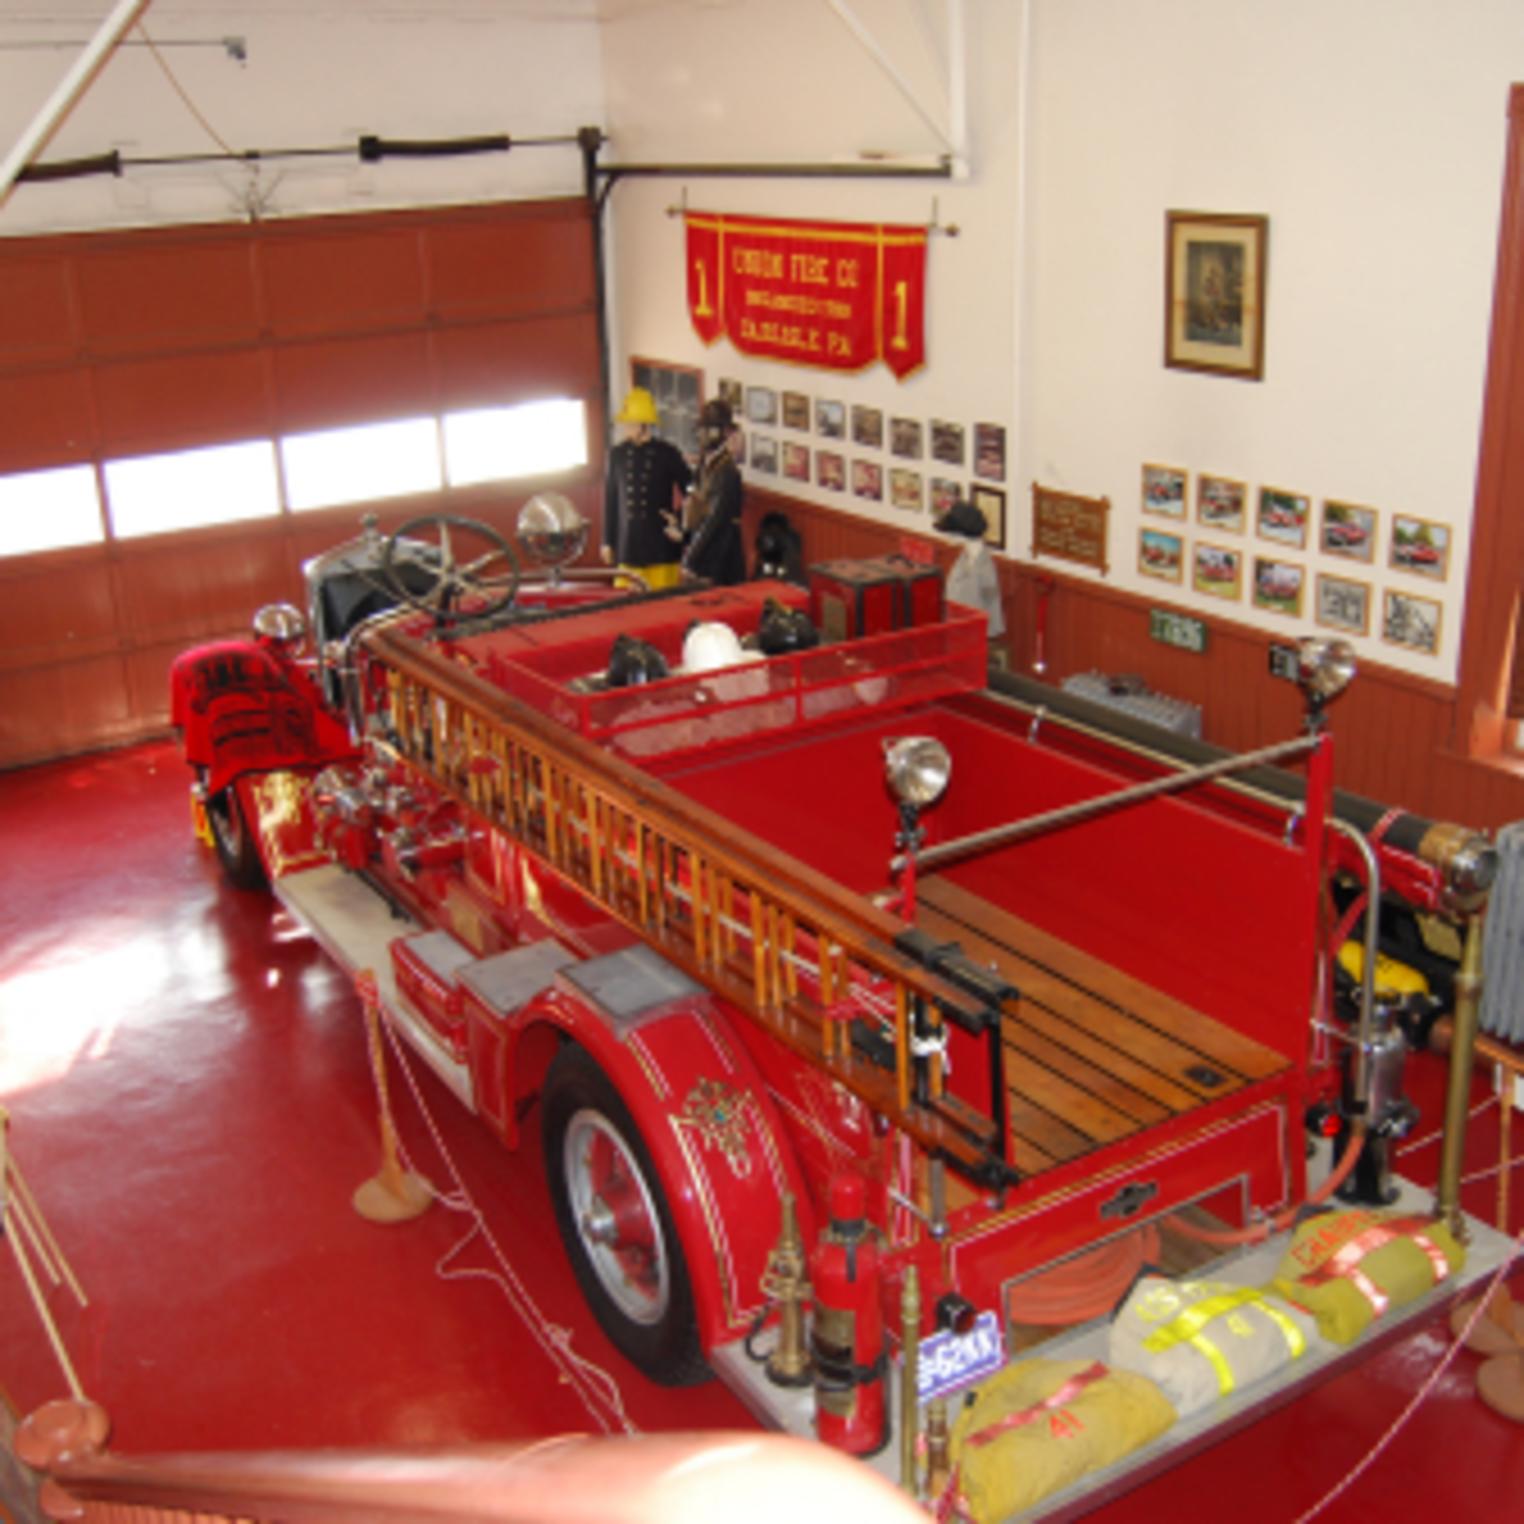 Firetruck Exhibit at the Union Fire Co. No. 1 Museum